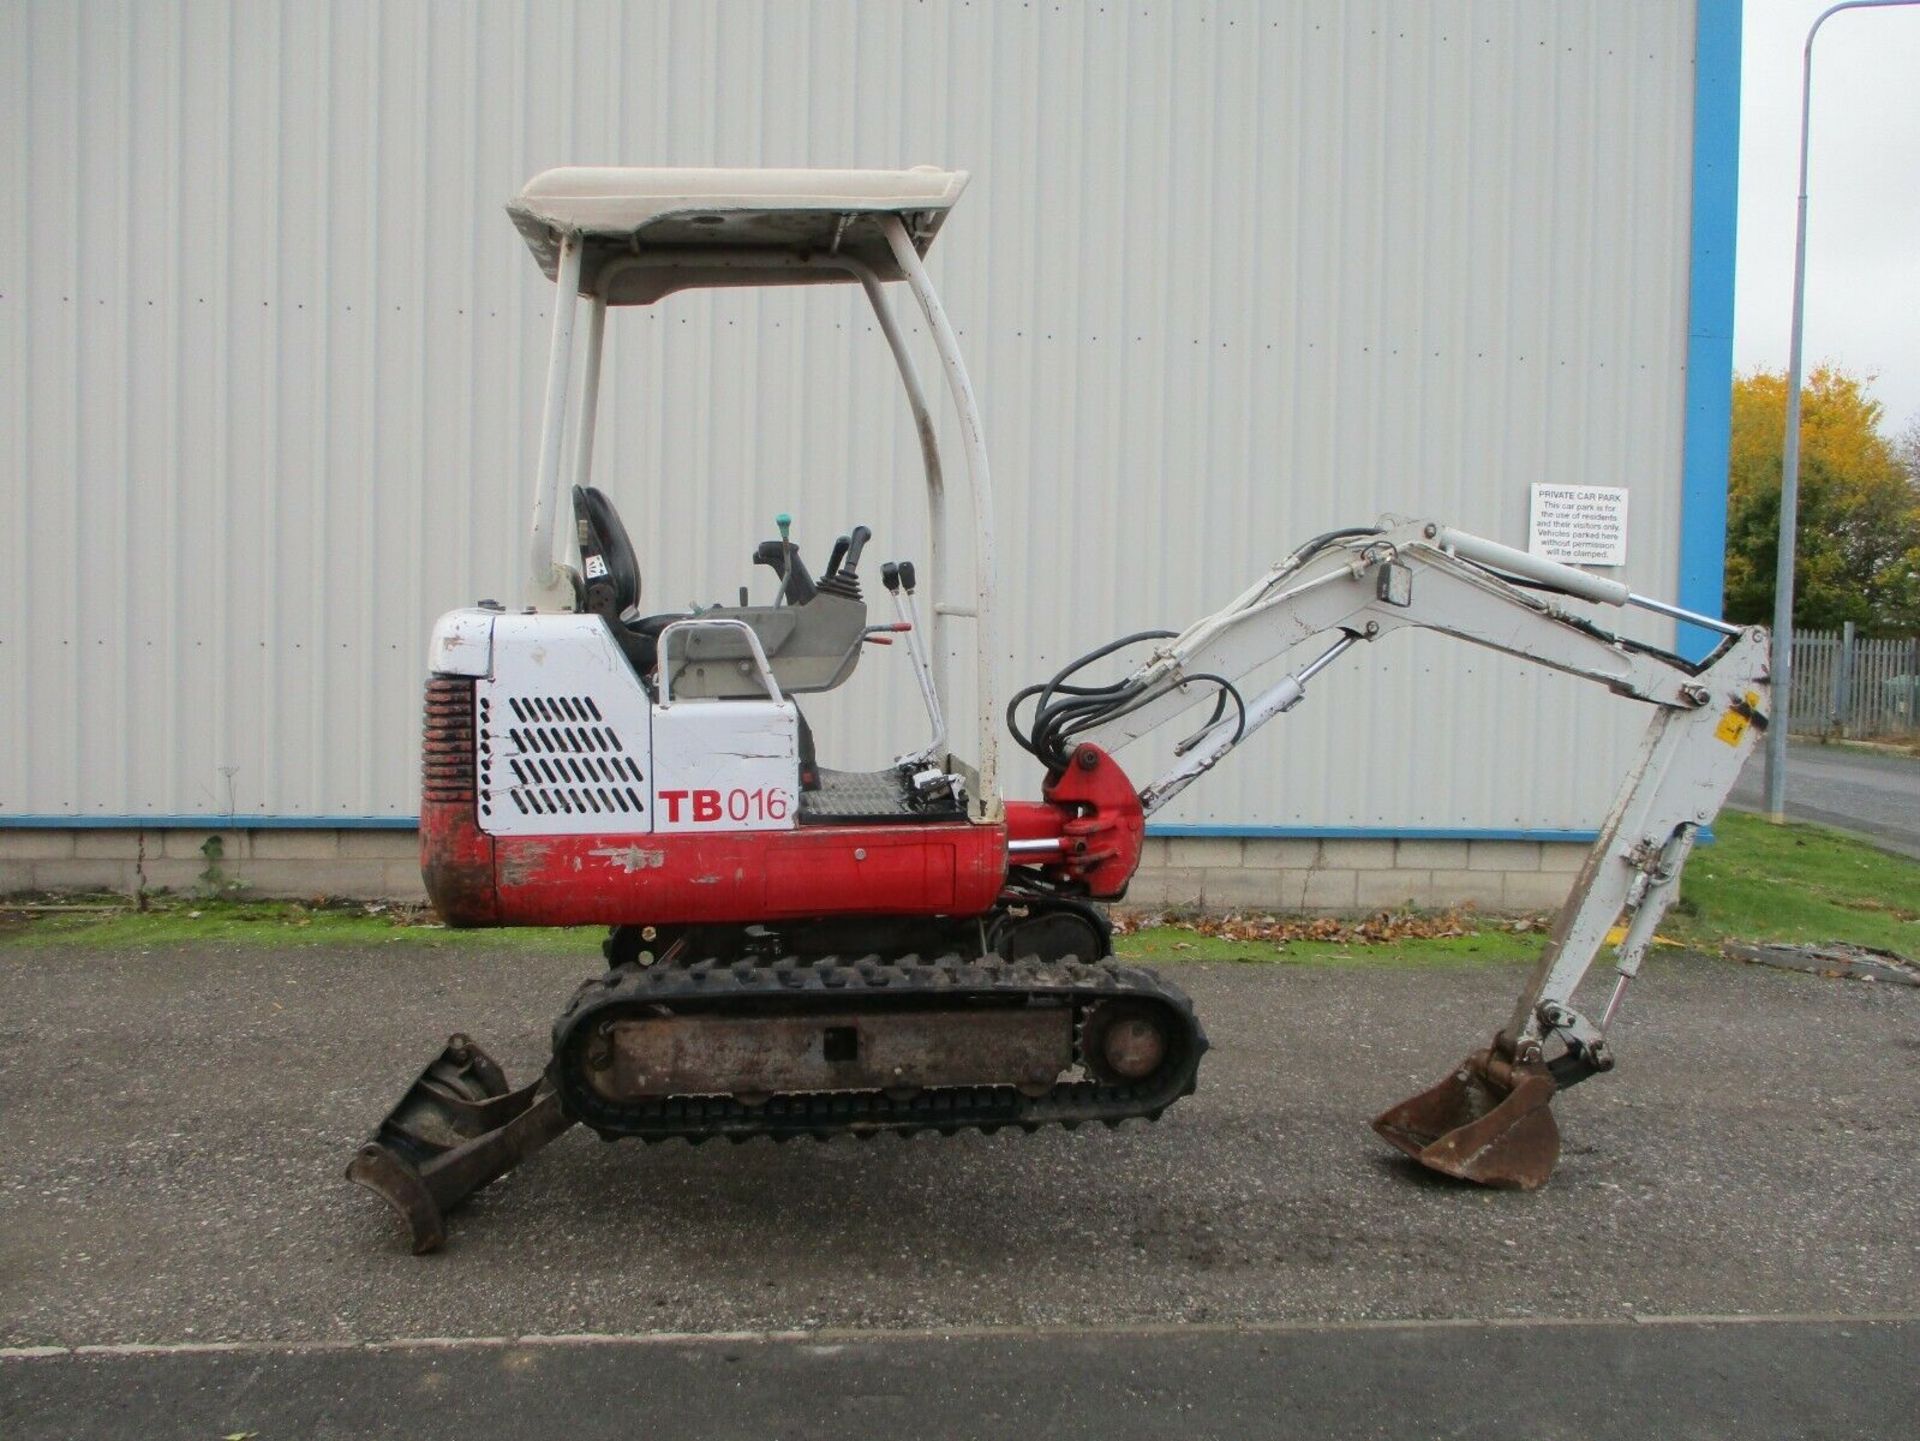 2009 Takeuchi TB016 mini digger excavator expanding tracks delivery arranged - Image 10 of 12